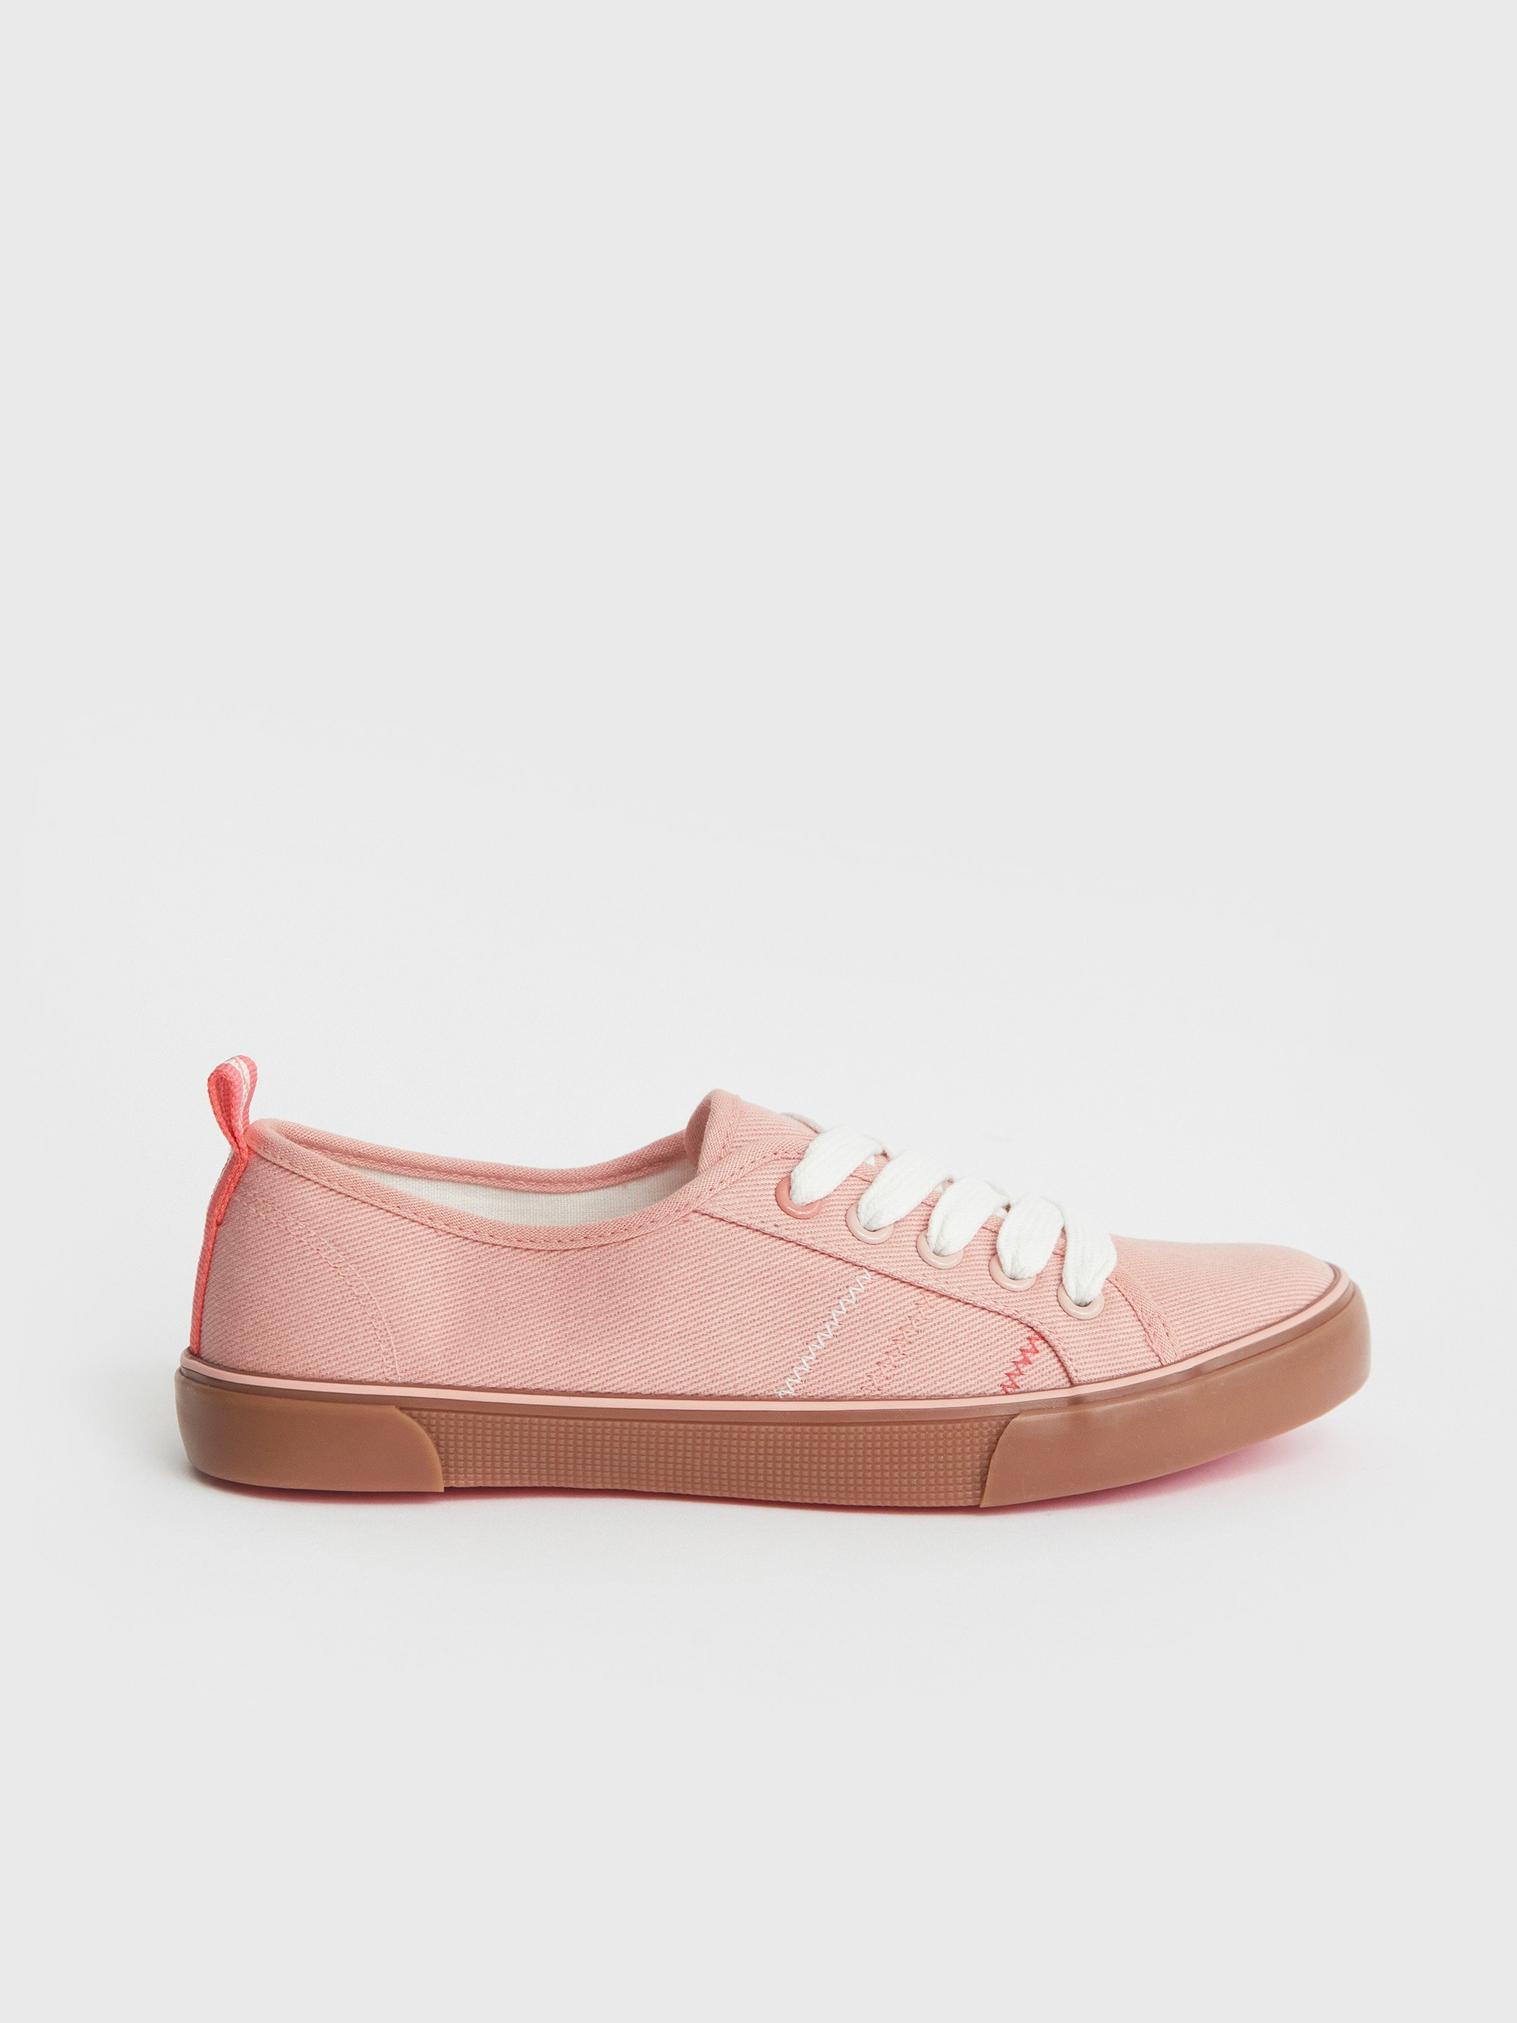 Piper Plimsoll in LGT PINK - MODEL FRONT